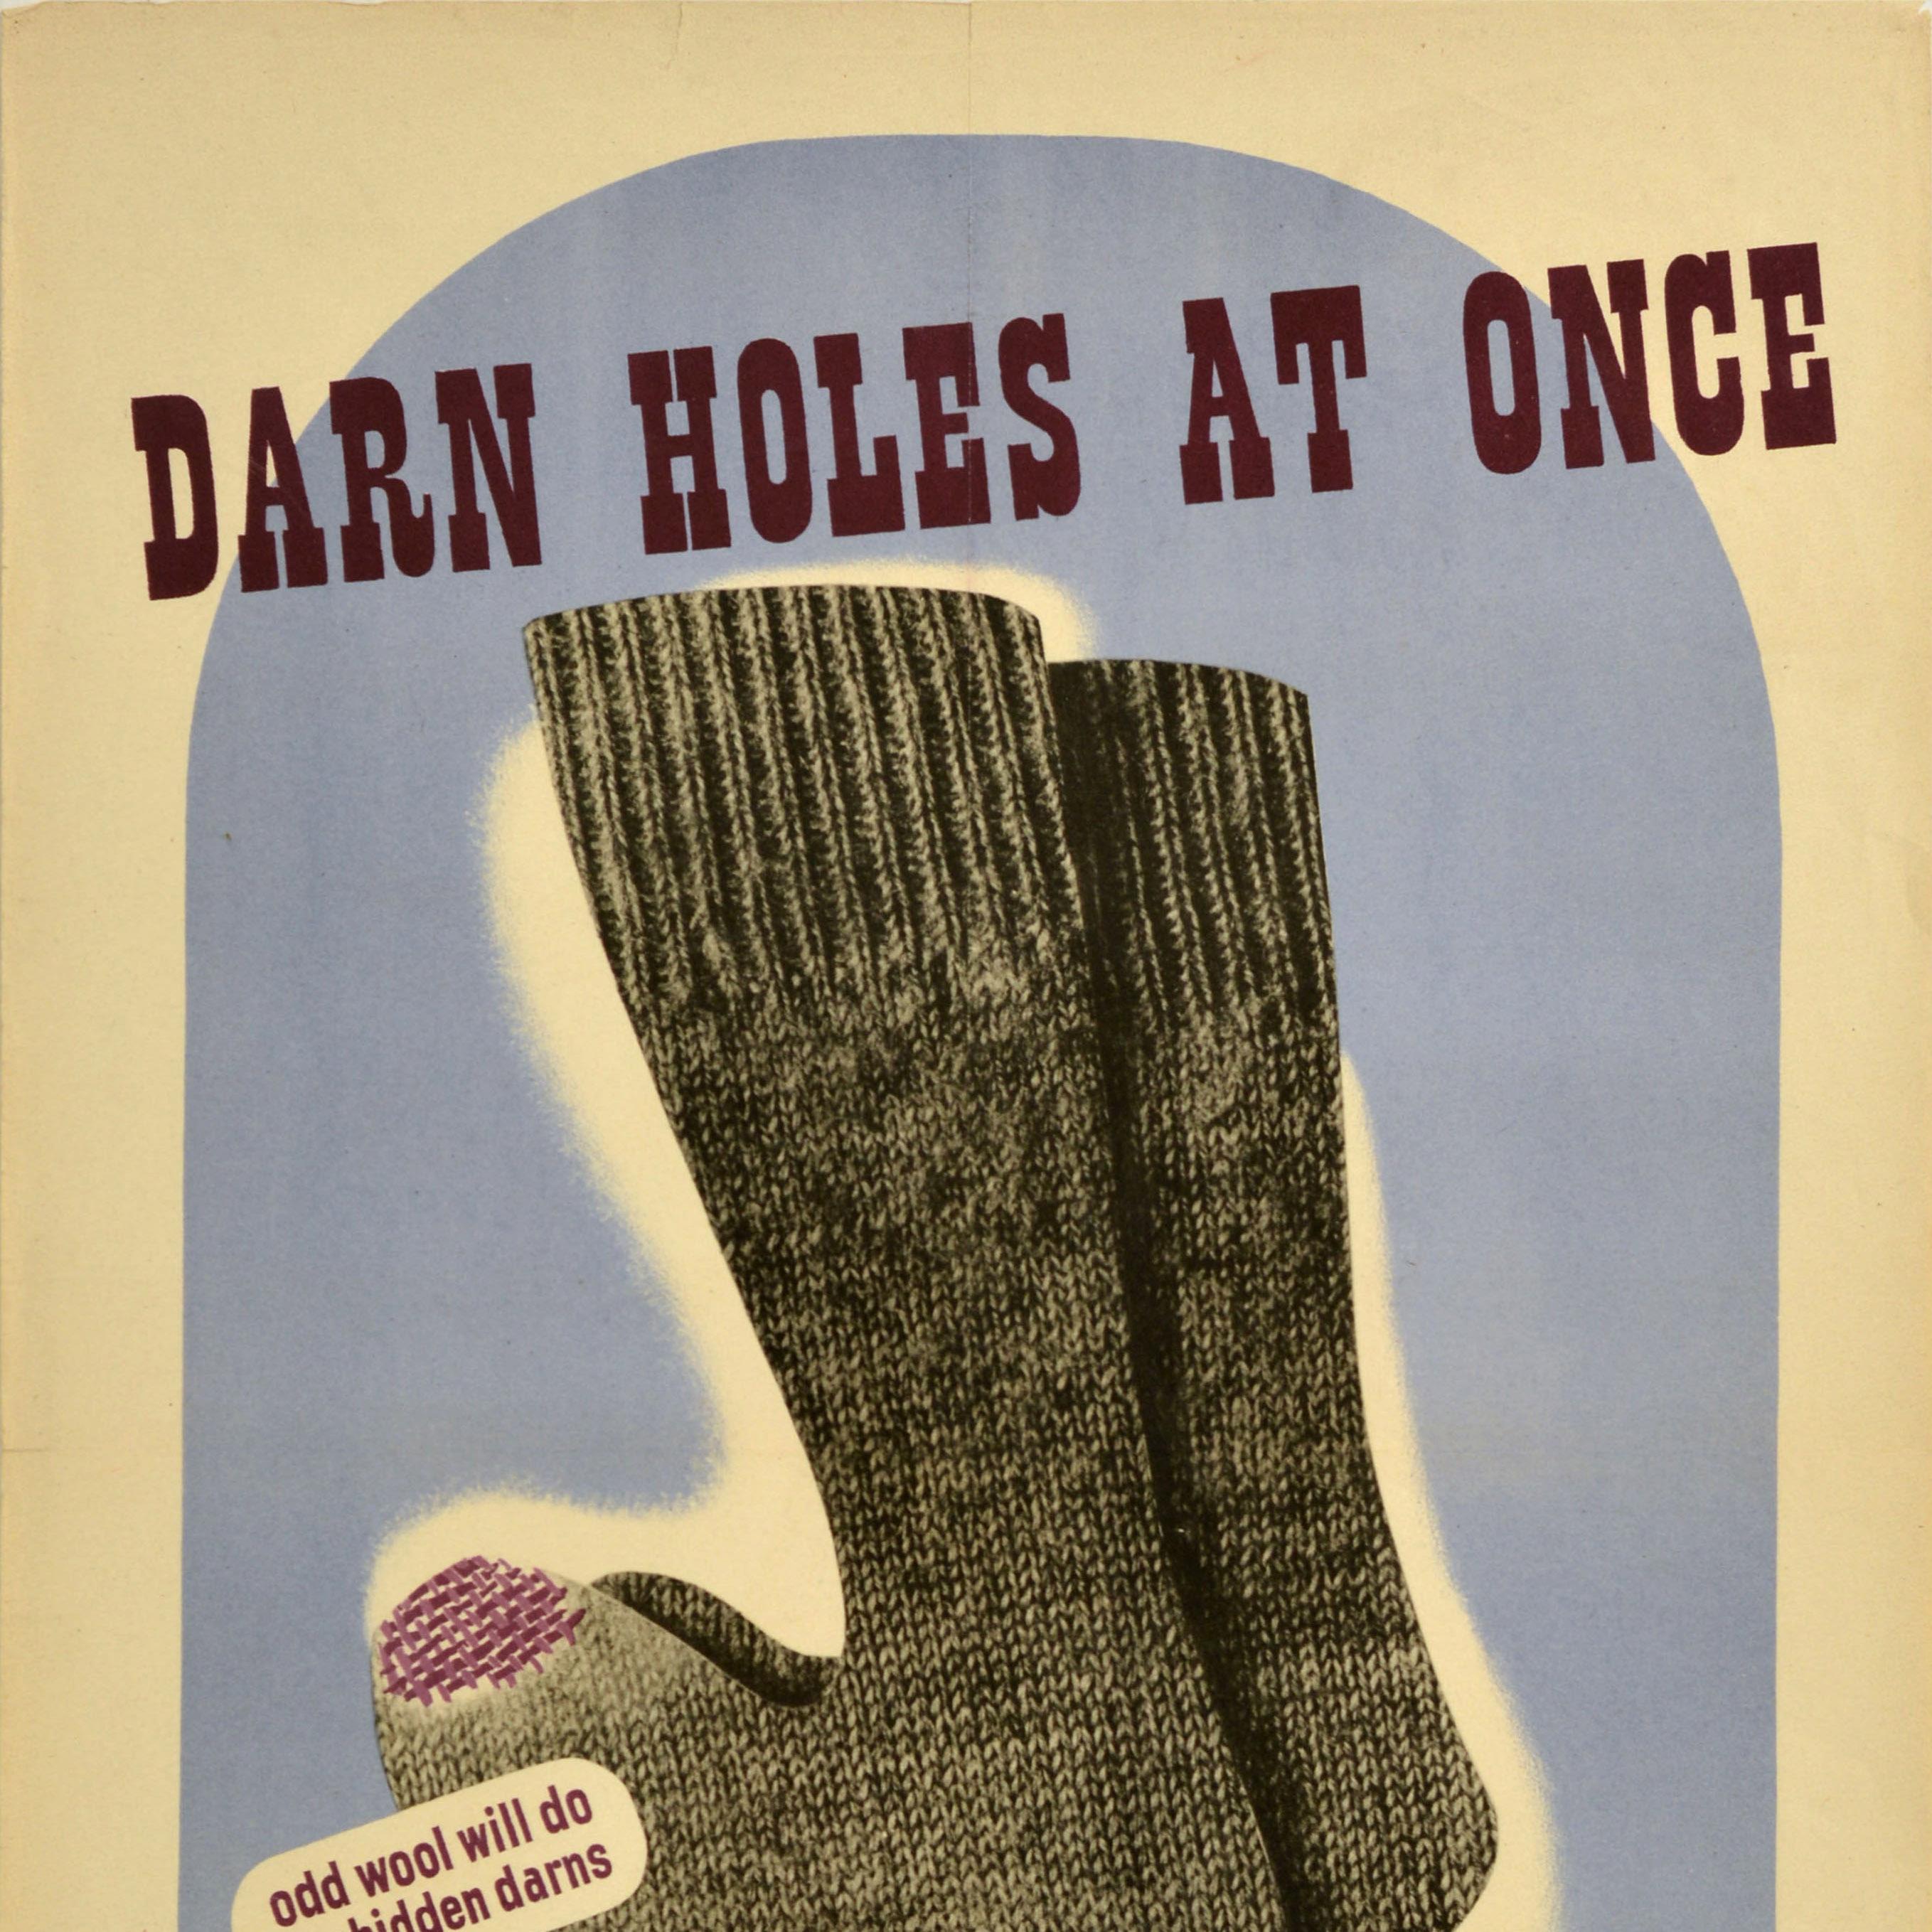 British Original Vintage World War Two Propaganda Poster Darn Holes At Once WWII Coupon For Sale